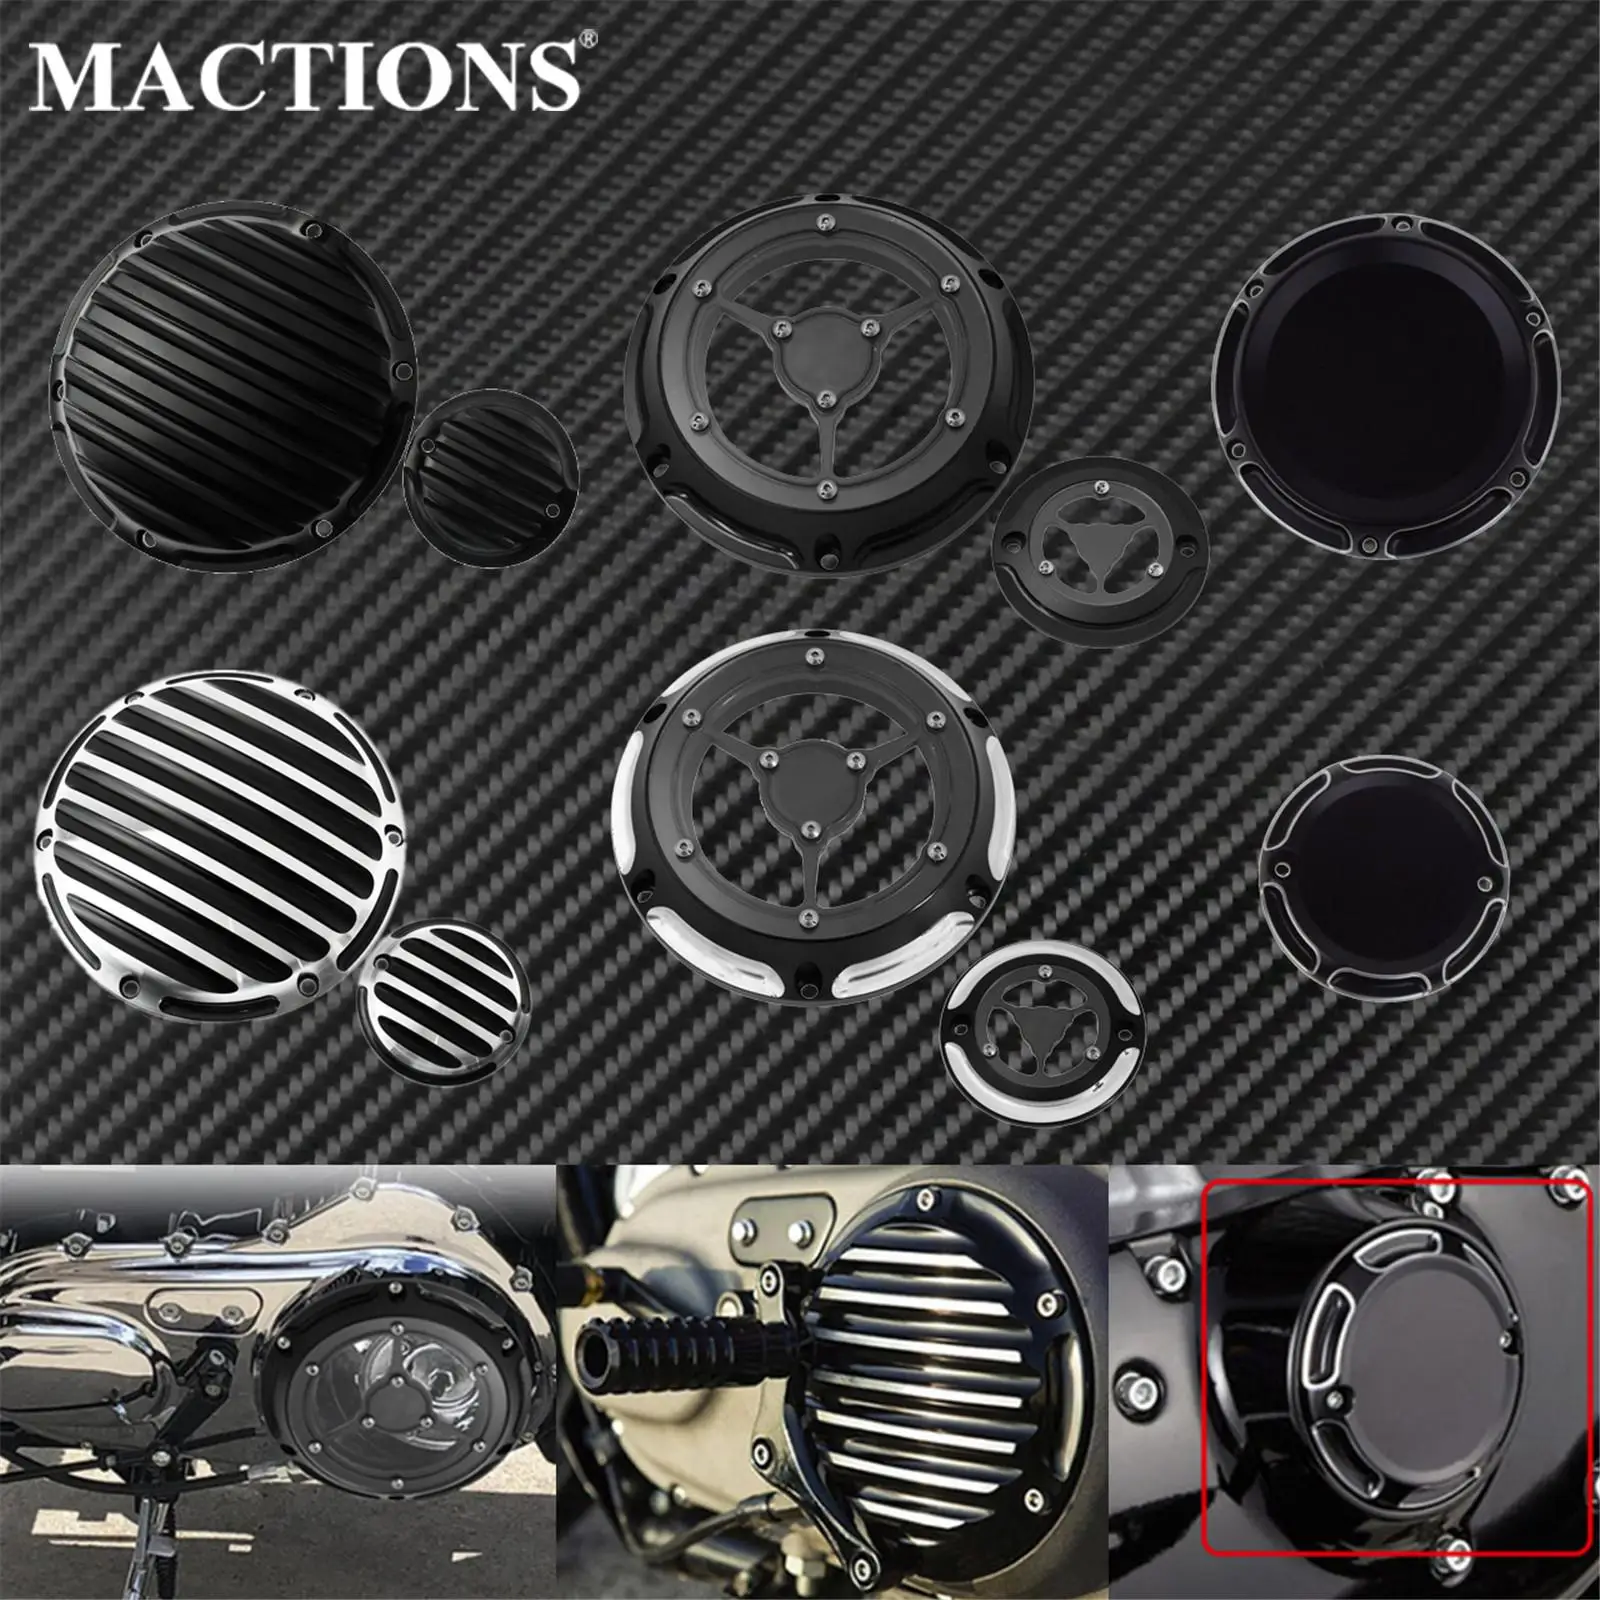 Motorcycle 6 Holes Derby Cover Timer Timing Cover CNC Aluminum For Harley Sportster XR XL 2004-Up XL1200 72 883 Iron Roadster